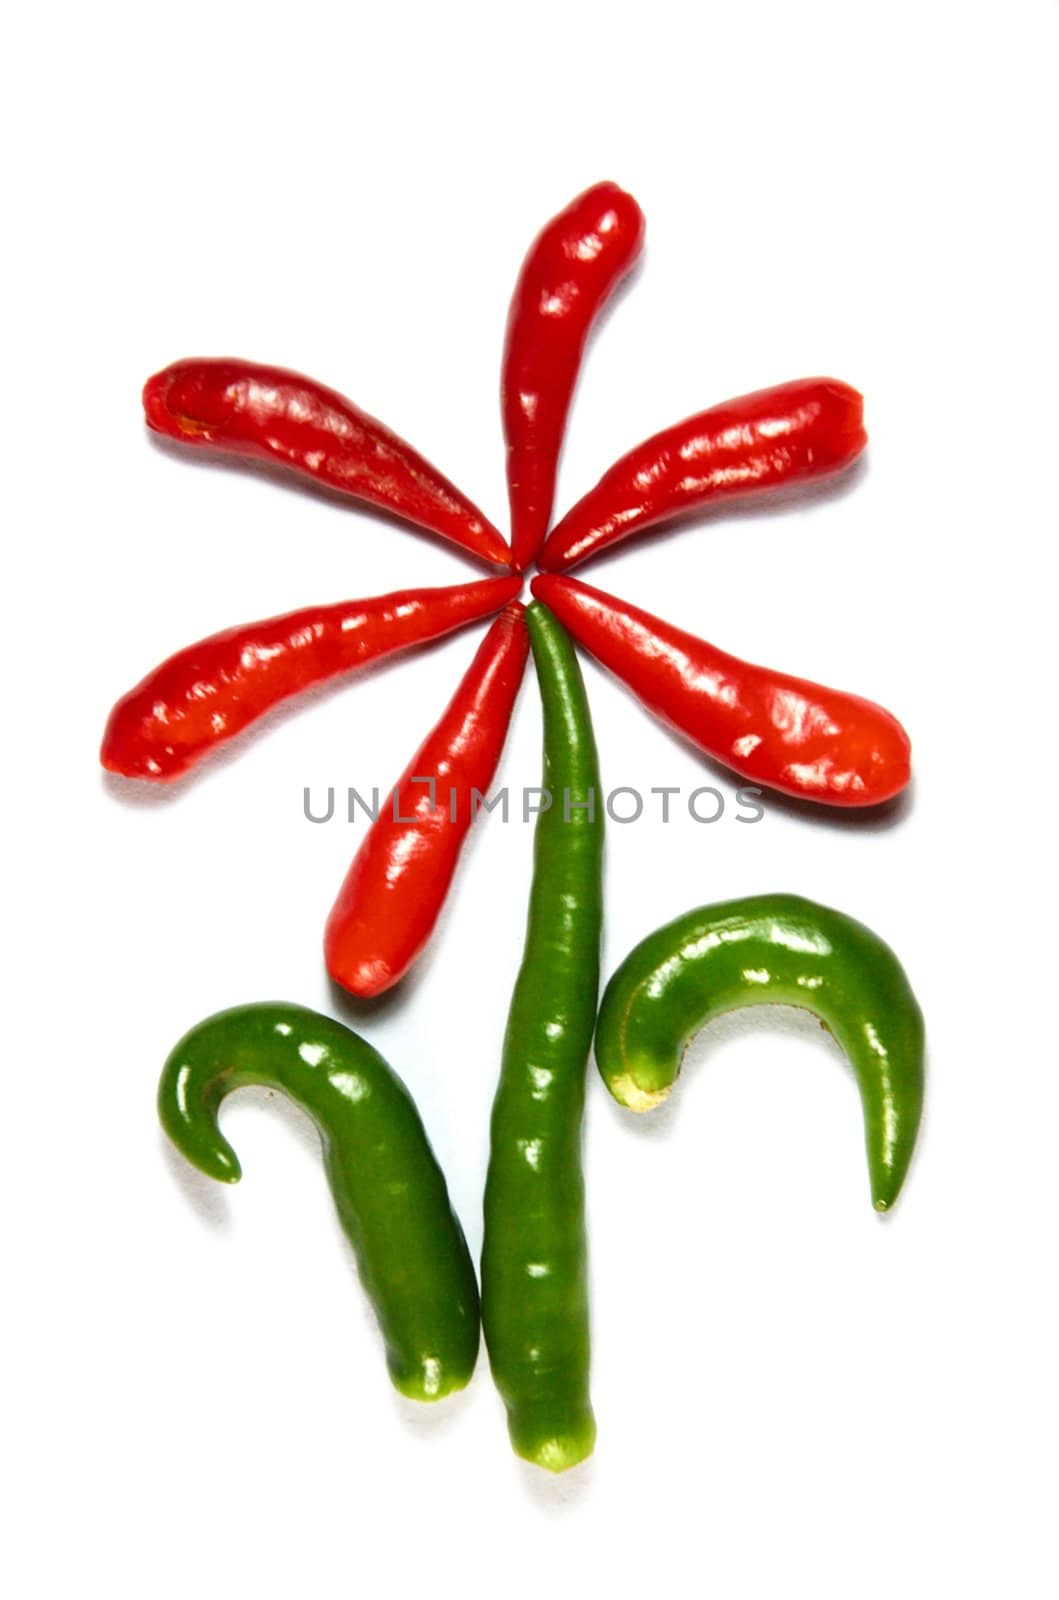  Flower from chili pepper isolated on white